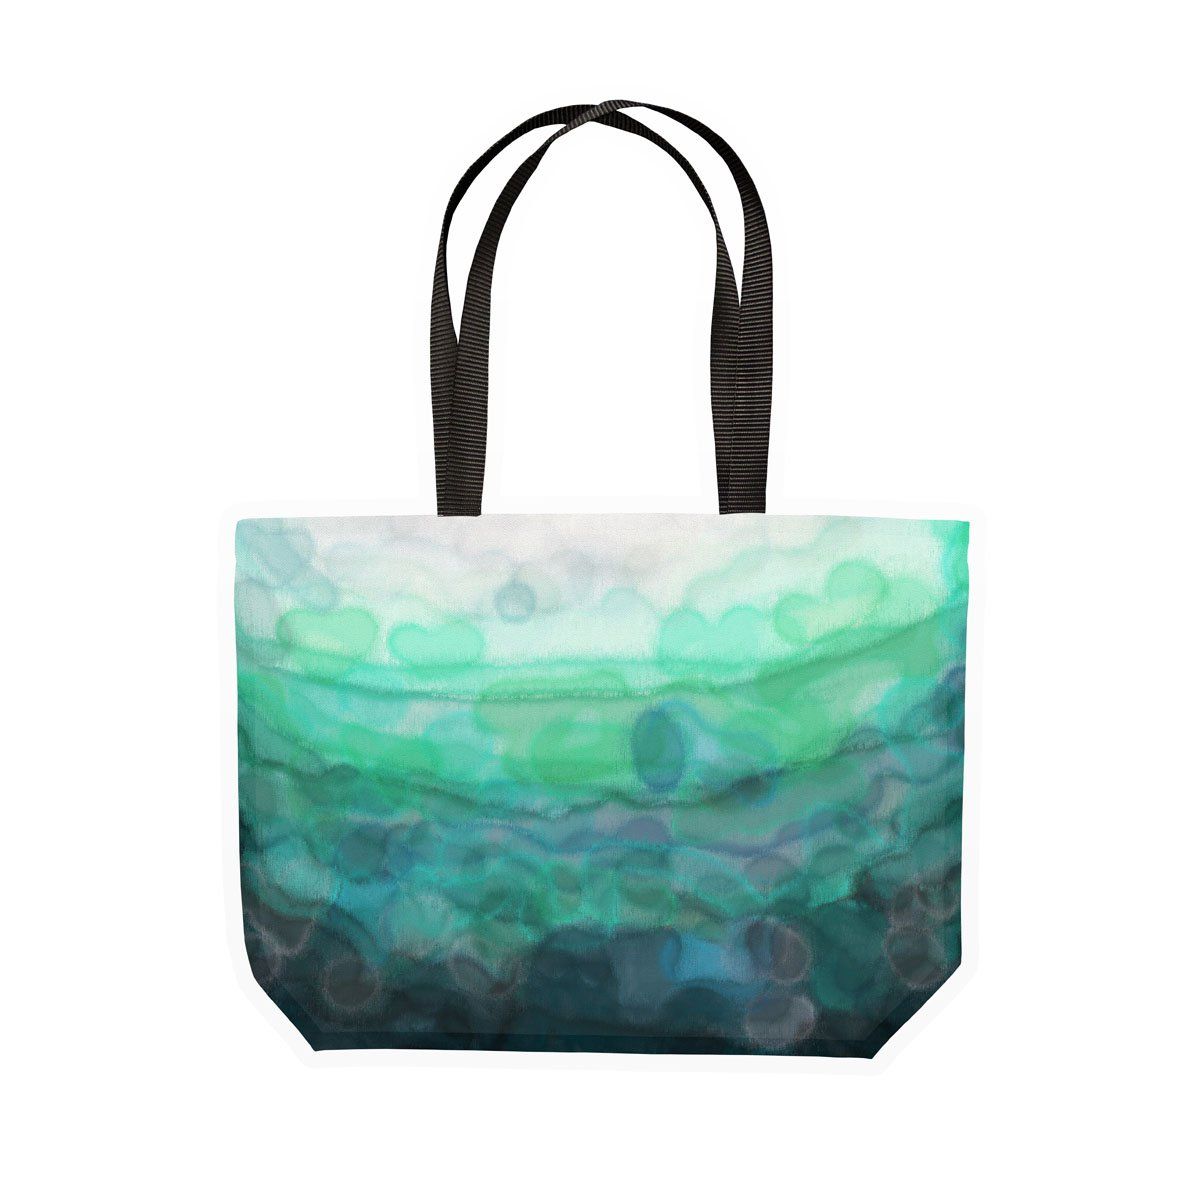 Teal 'Serenity' Canvas Tote Bag - Louise Mead